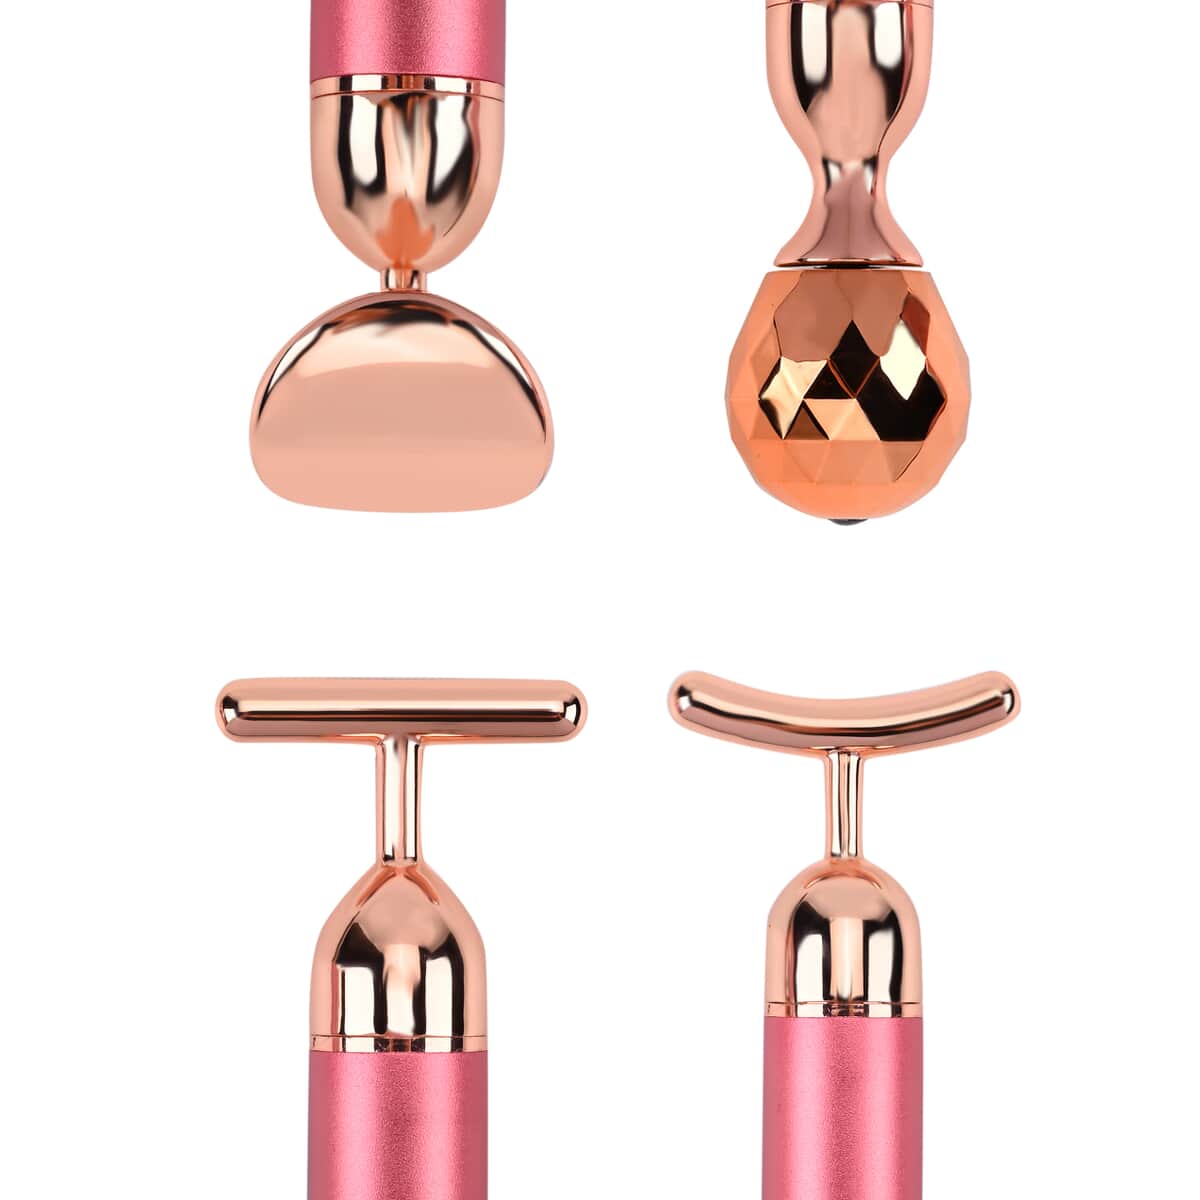 4-in-1 Face Massager Rollers with Four Interchangeable Massage Heads - Rose Gold, 1xAA Battery Not Including image number 6